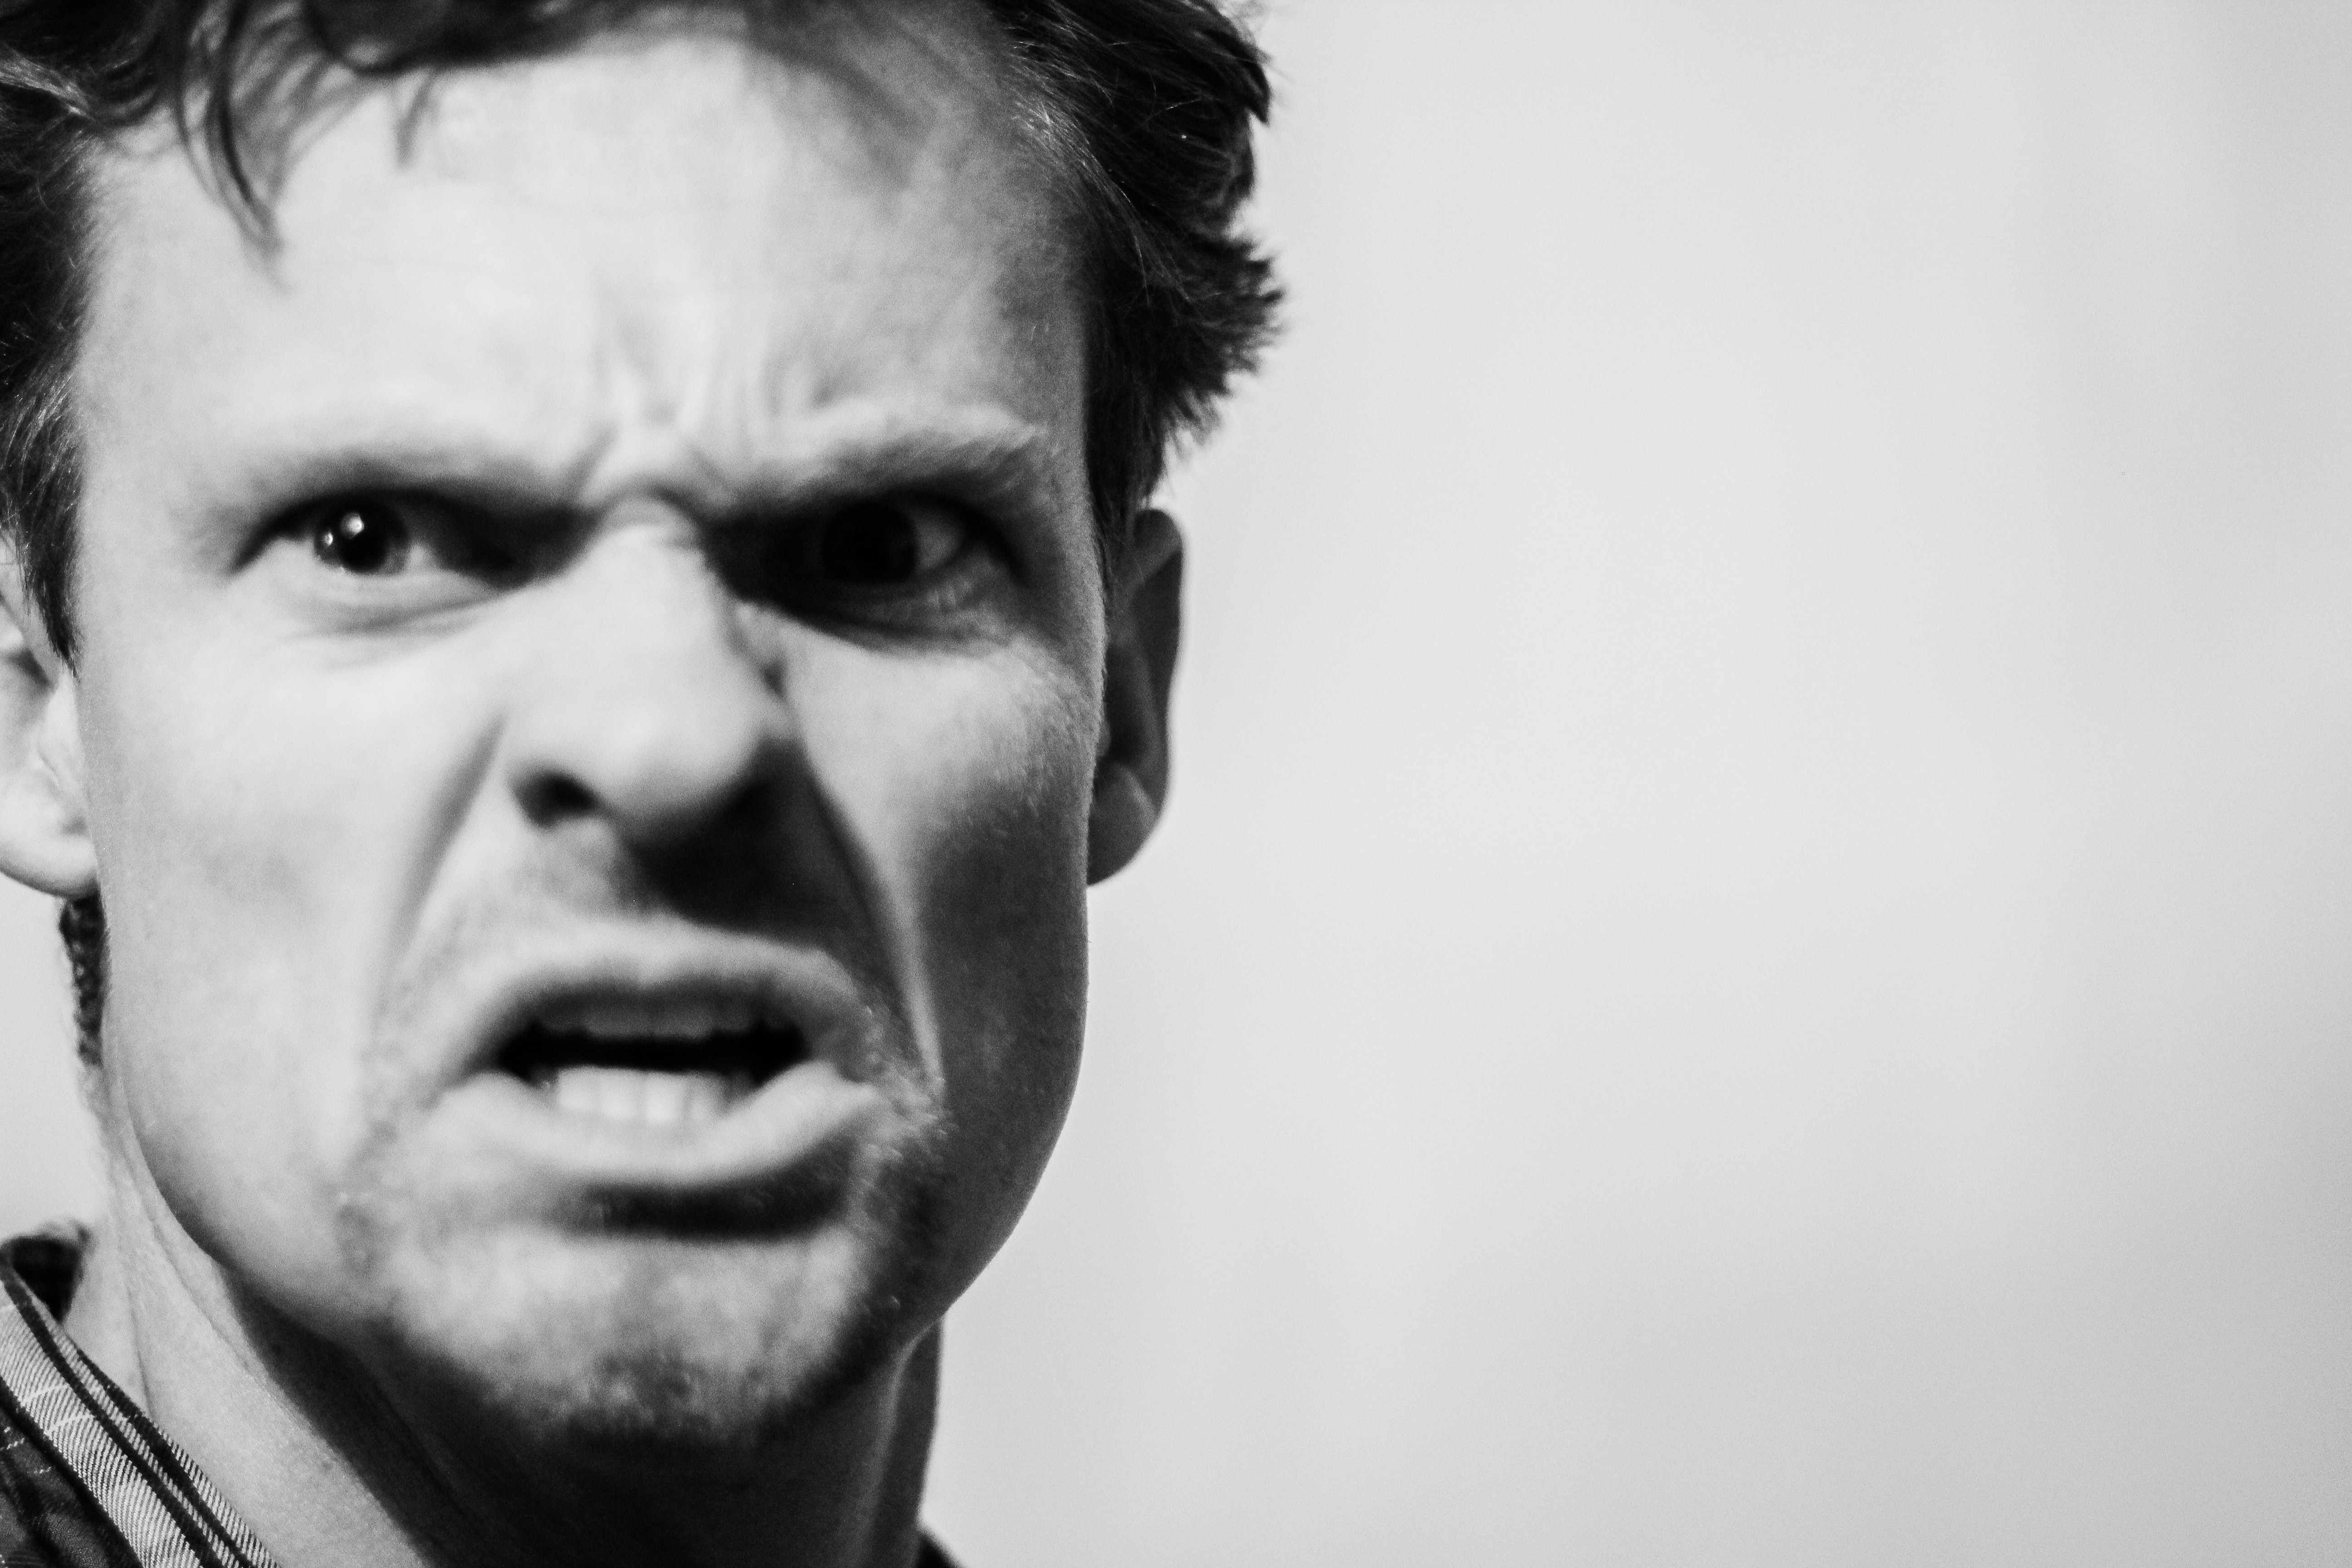 Free stock photo of angry, angry man, man